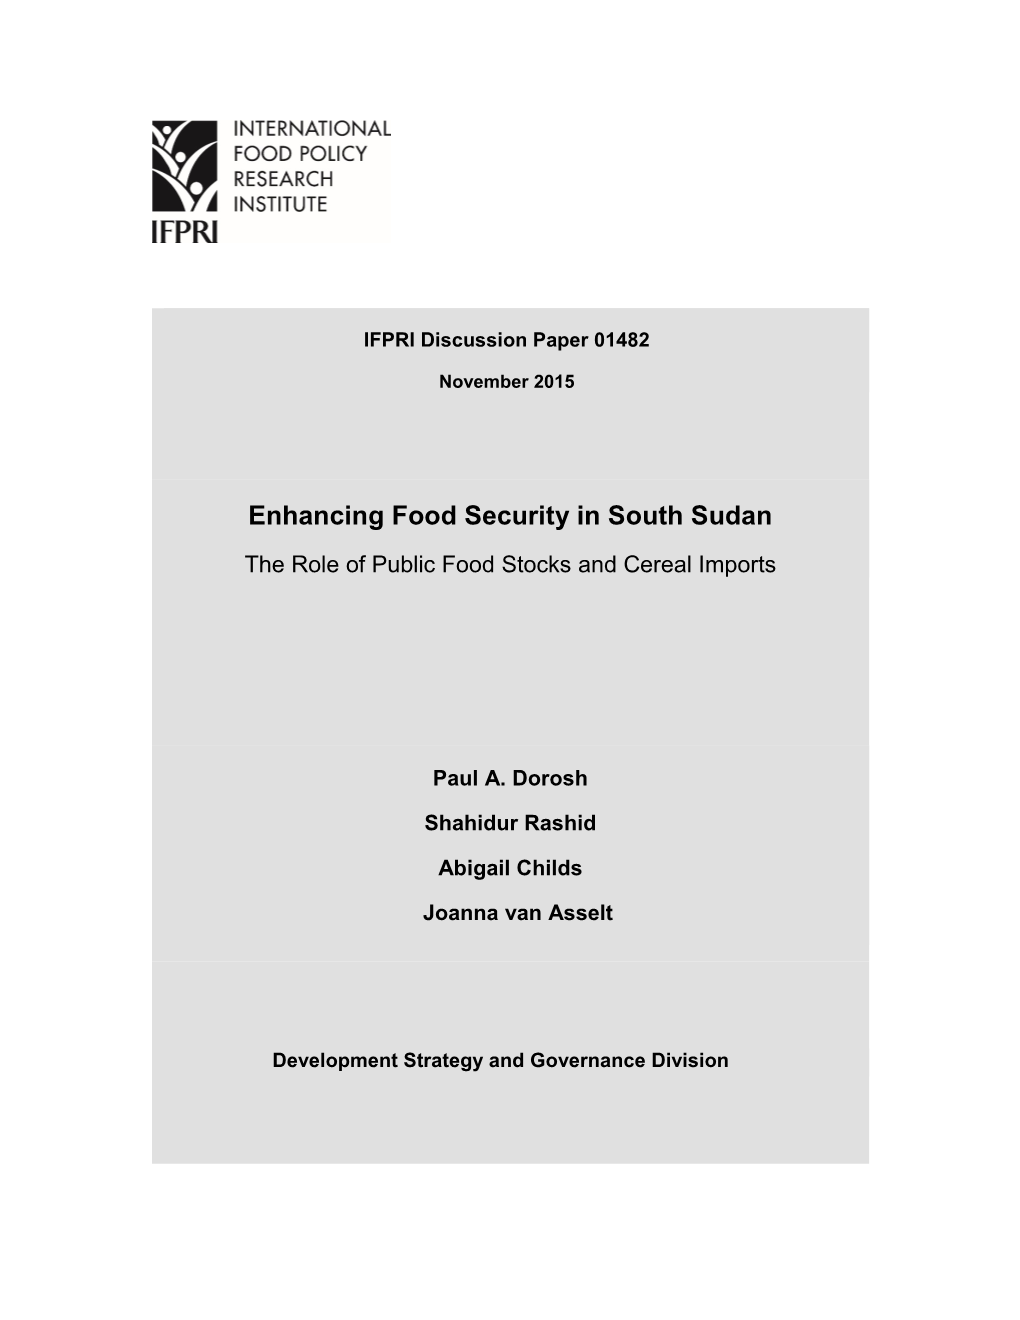 Enhancing Food Security in South Sudan the Role of Public Food Stocks and Cereal Imports